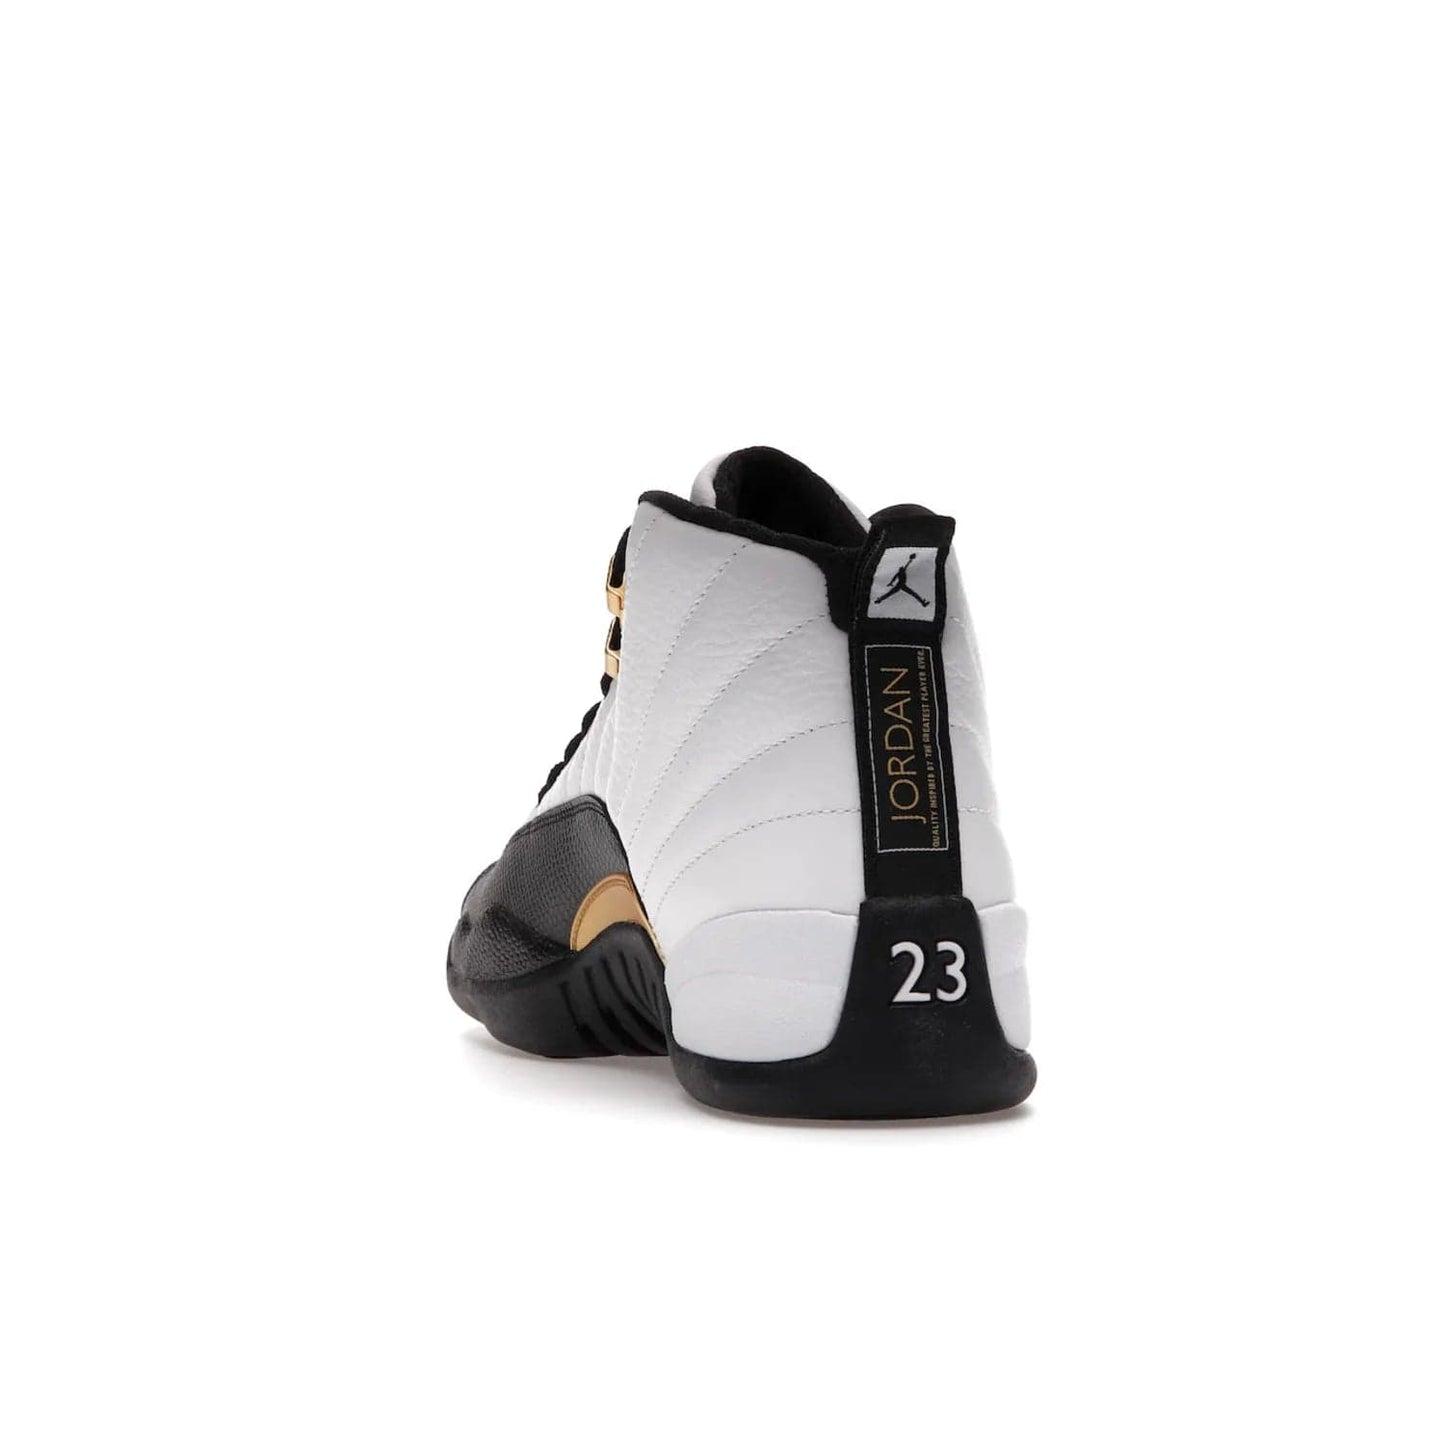 Jordan 12 Retro Royalty Taxi - Image 26 - Only at www.BallersClubKickz.com - Make a statement with the Air Jordan 12 Retro Royalty Taxi. Woven heel tag, gold plaquet, white tumbled leather upper plus a black toe wrap, make this modern take on the classic a must-have. Available in November 2021.